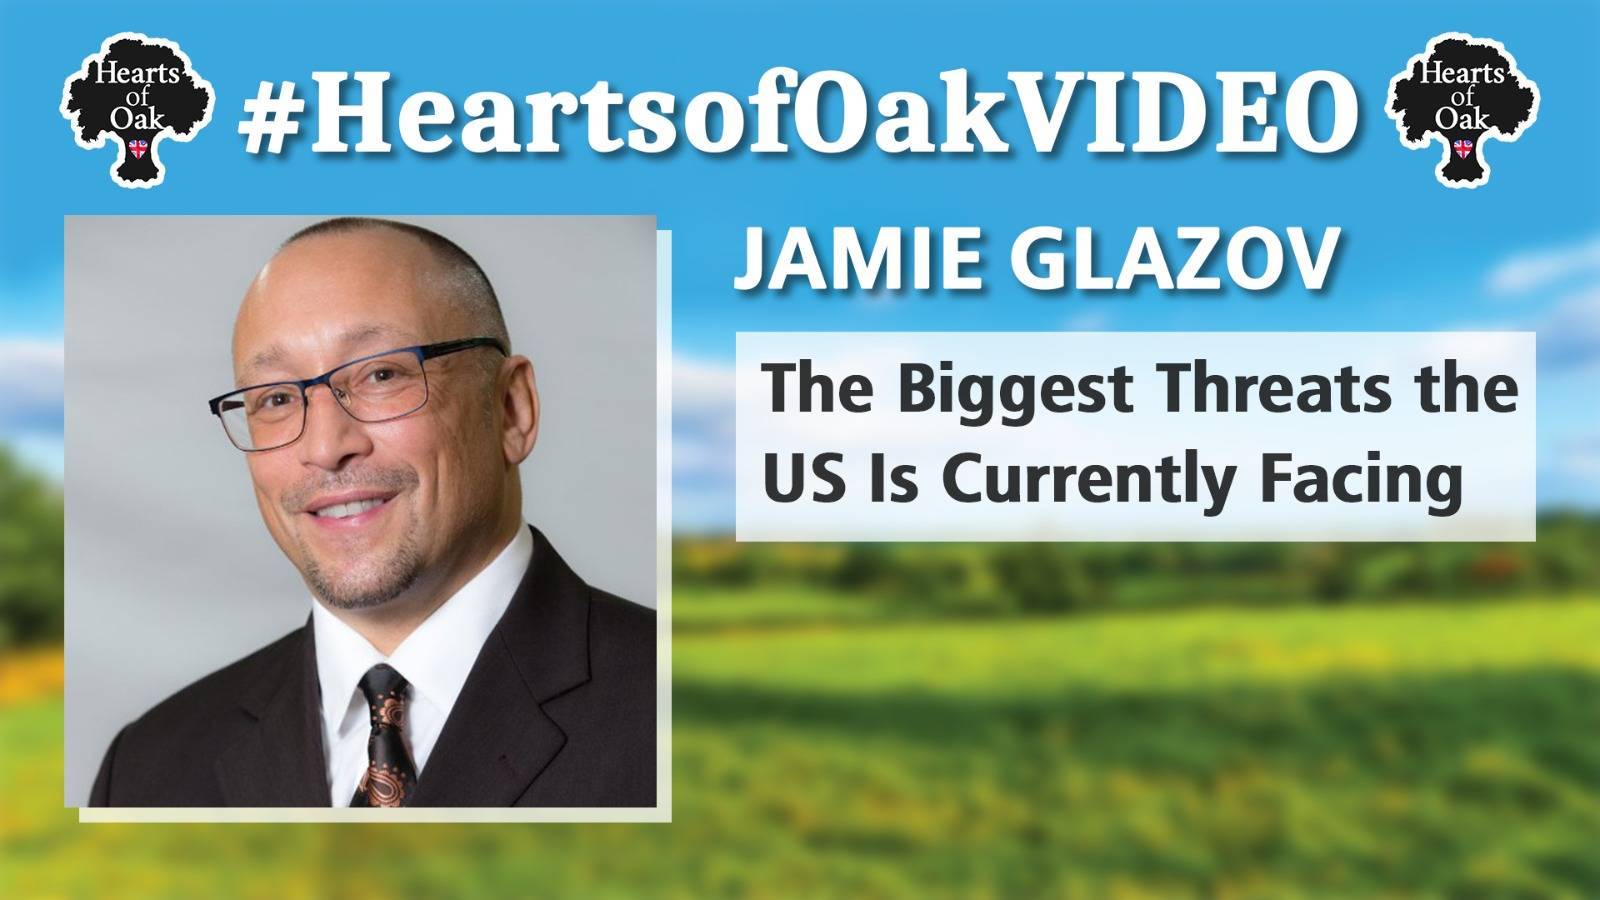 Jamie Glazov: The Biggest Threats the US is Currently Facing